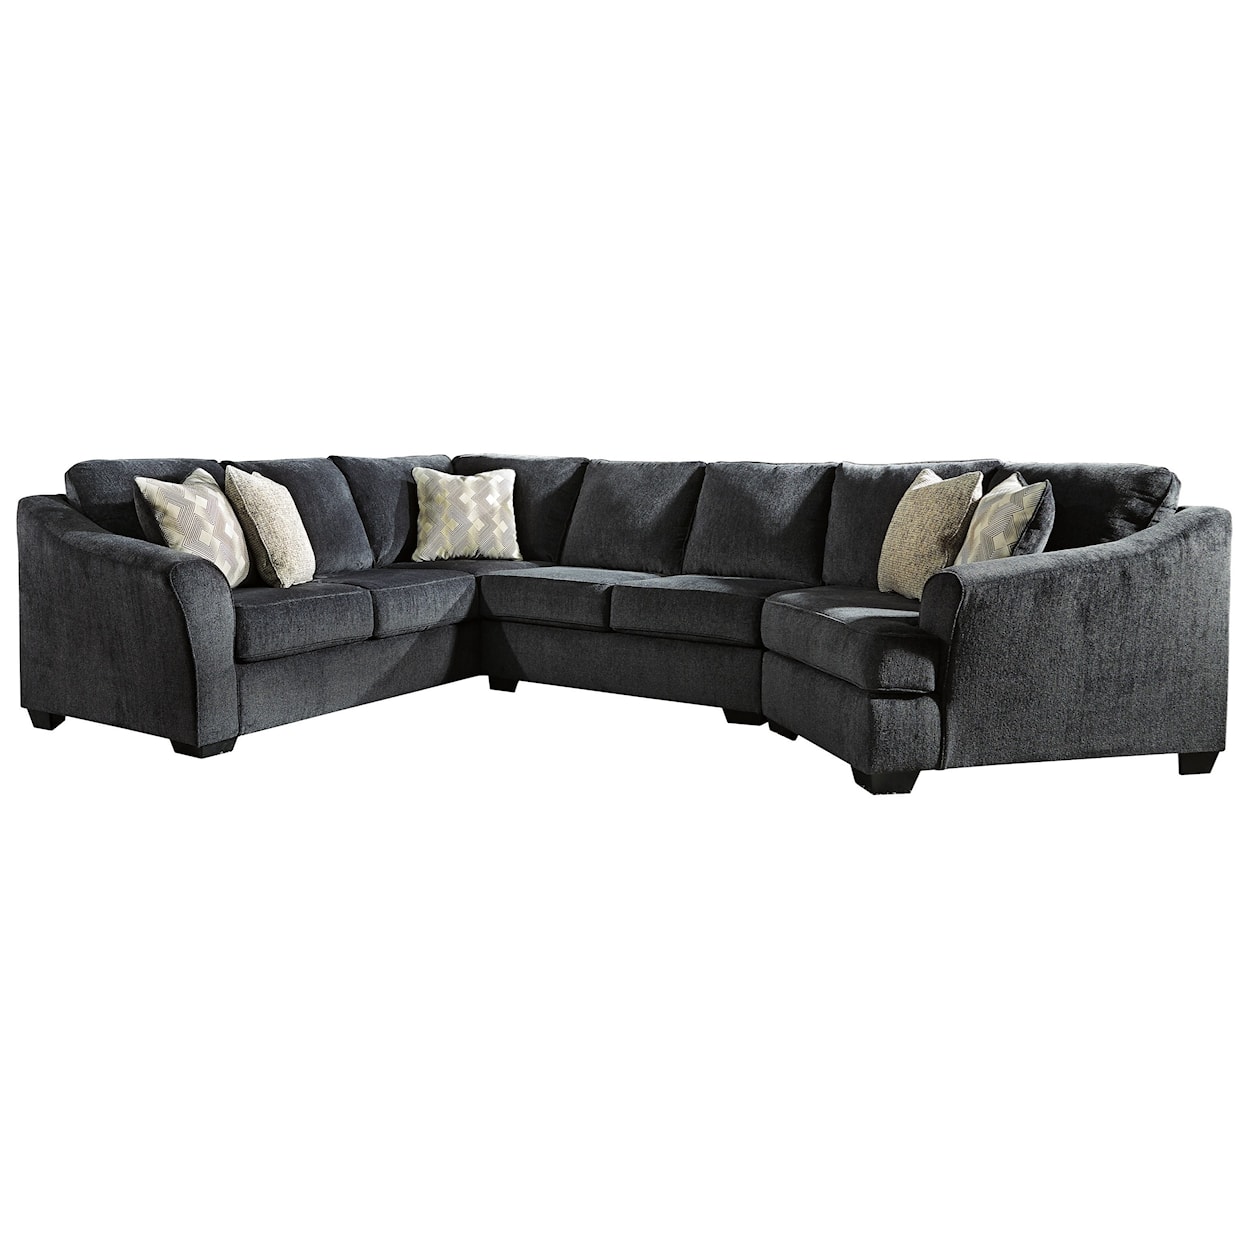 Michael Alan Select Eltmann 3-Piece Sectional with Right Cuddler